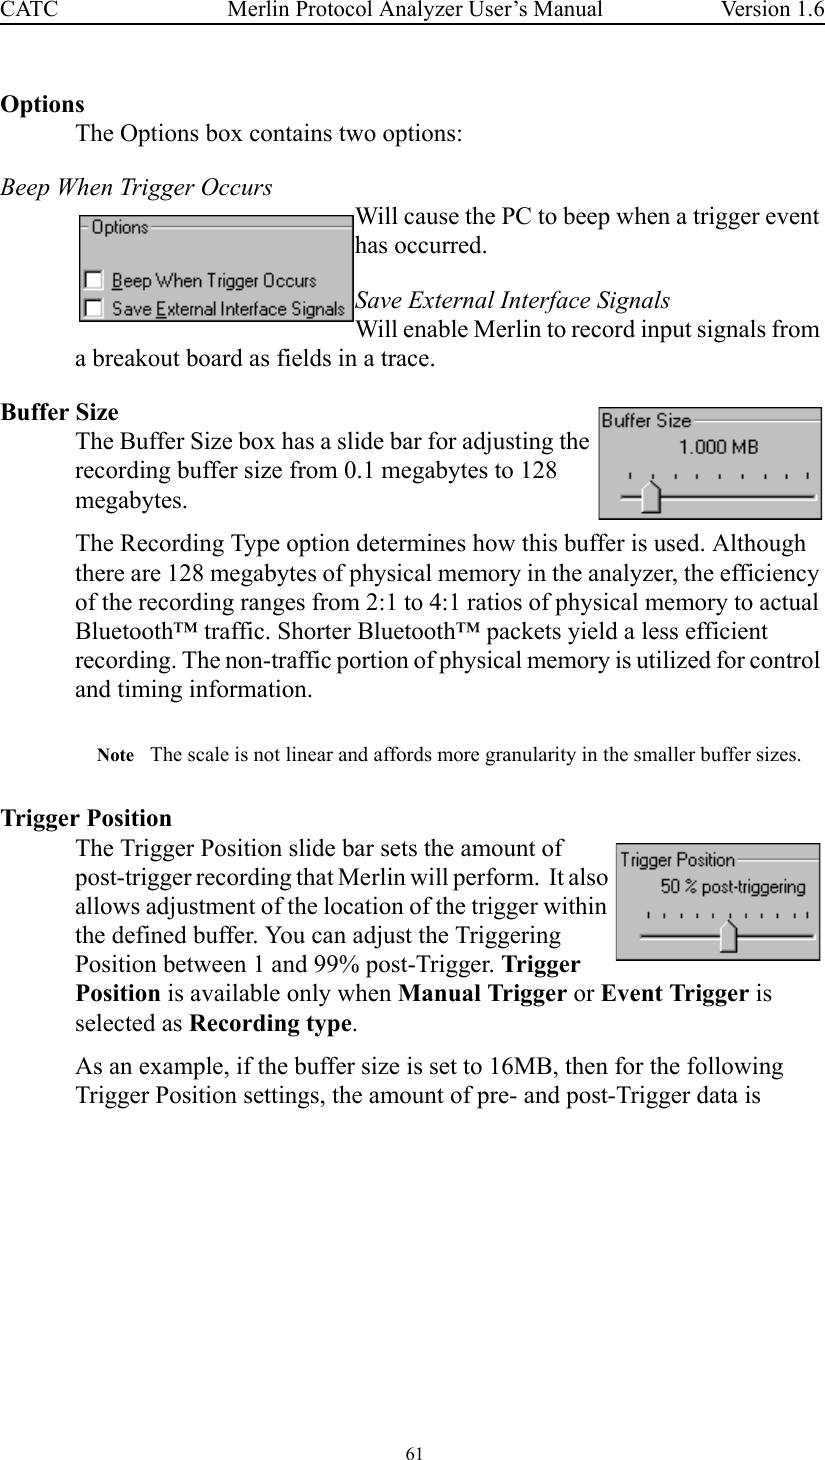  61 Merlin Protocol Analyzer User’s ManualCATC Version 1.6OptionsThe Options box contains two options:Beep When Trigger OccursWill cause the PC to beep when a trigger event has occurred.Save External Interface SignalsWill enable Merlin to record input signals from a breakout board as fields in a trace.Buffer SizeThe Buffer Size box has a slide bar for adjusting the recording buffer size from 0.1 megabytes to 128 megabytes. The Recording Type option determines how this buffer is used. Although there are 128 megabytes of physical memory in the analyzer, the efficiency of the recording ranges from 2:1 to 4:1 ratios of physical memory to actual Bluetooth™ traffic. Shorter Bluetooth™ packets yield a less efficient recording. The non-traffic portion of physical memory is utilized for control and timing information.Note The scale is not linear and affords more granularity in the smaller buffer sizes. Trigger PositionThe Trigger Position slide bar sets the amount of post-trigger recording that Merlin will perform.  It also allows adjustment of the location of the trigger within the defined buffer. You can adjust the Triggering Position between 1 and 99% post-Trigger. Trigger Position is available only when Manual Trigger or Event Trigger is selected as Recording type.As an example, if the buffer size is set to 16MB, then for the following Trigger Position settings, the amount of pre- and post-Trigger data is